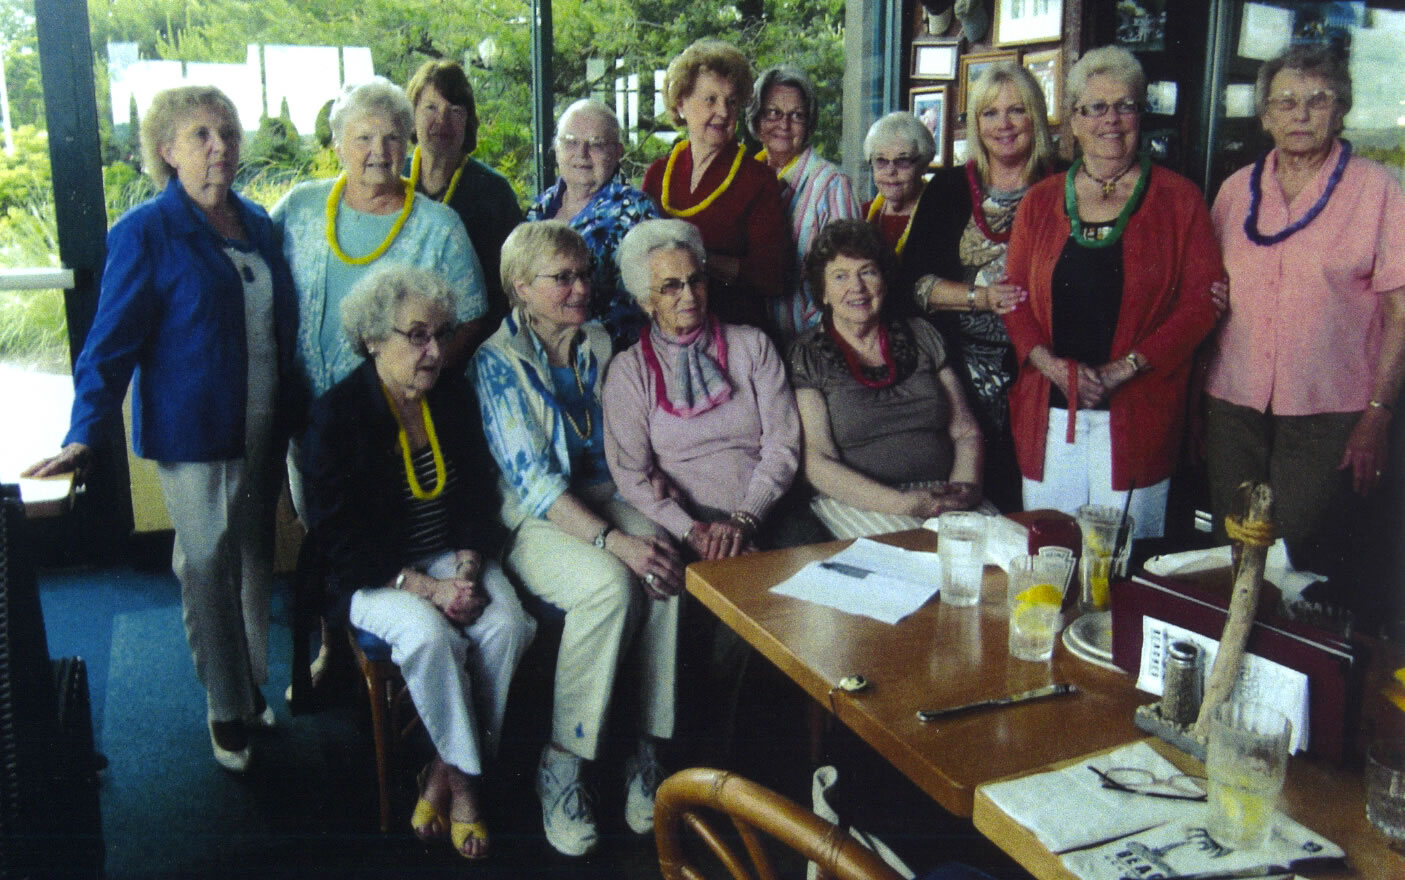 Members of what was once Girl Scout Troop 61 still meet once a month. The group was founded in 1948 but changed its name to the Evergreen Pollyannas when members aged out of the Girl Scouts.